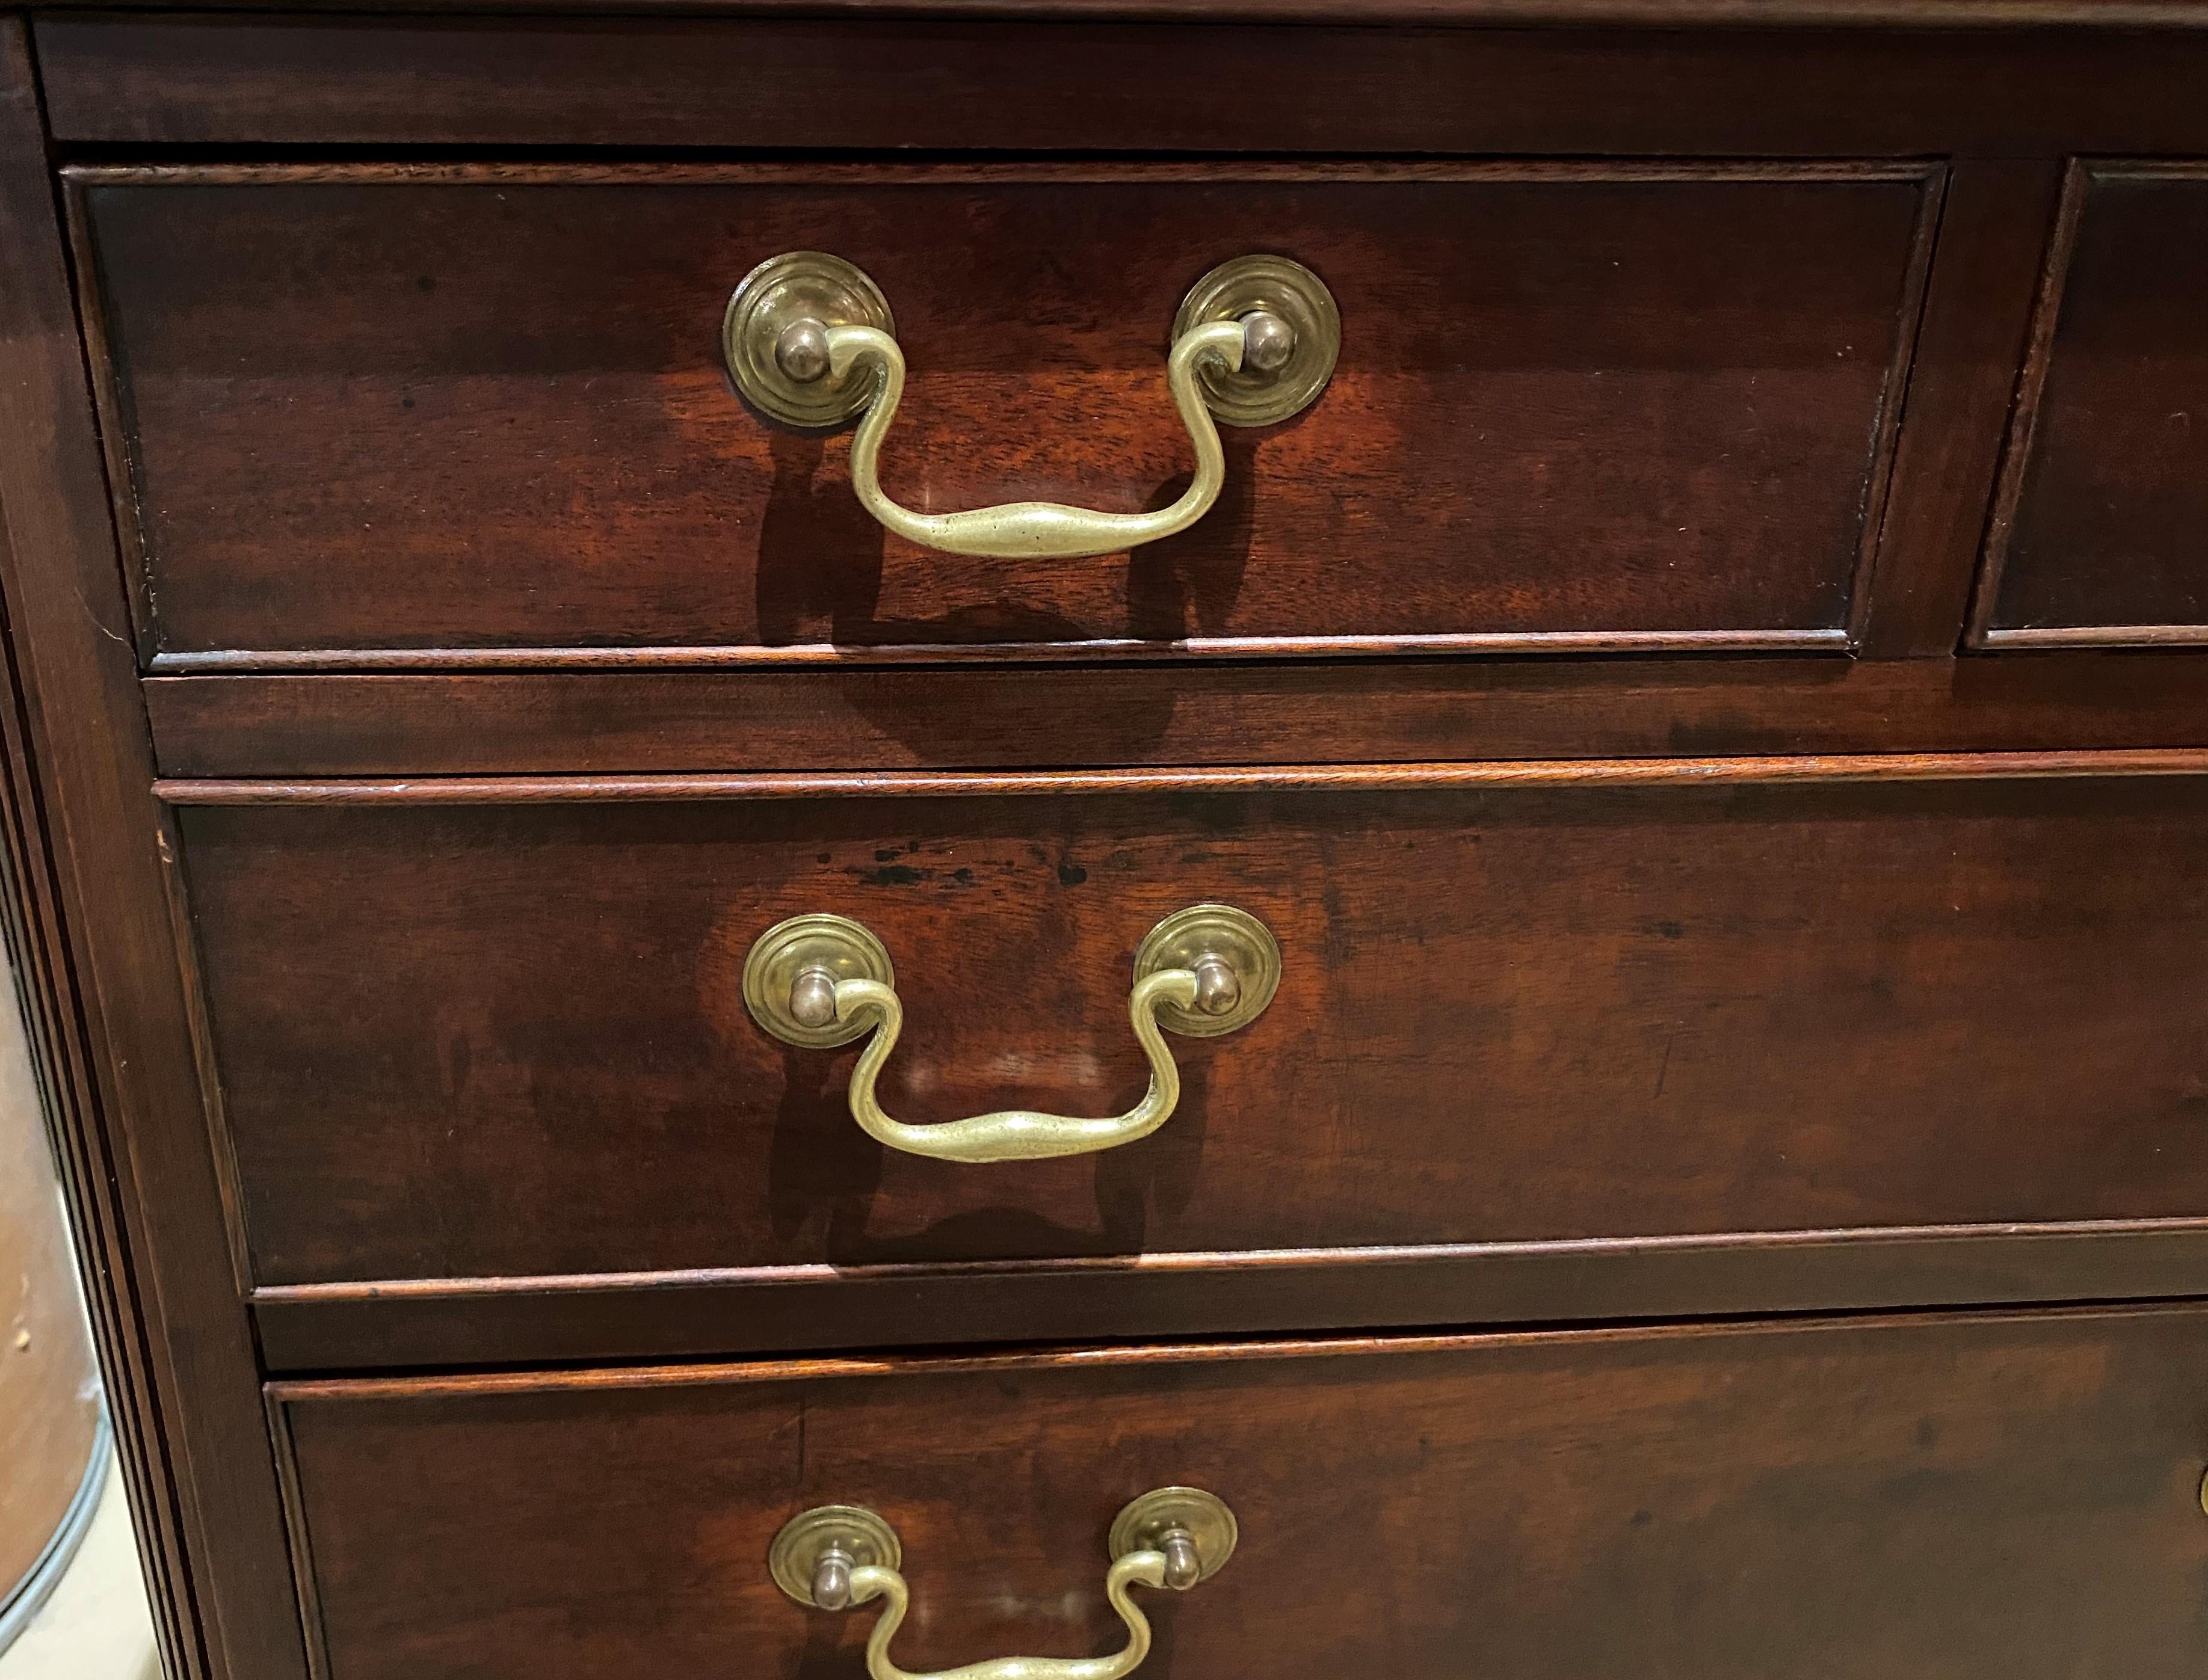 American Diminutive Chippendale Mahogany Chest Adapted From a Larger 18th Century Chest